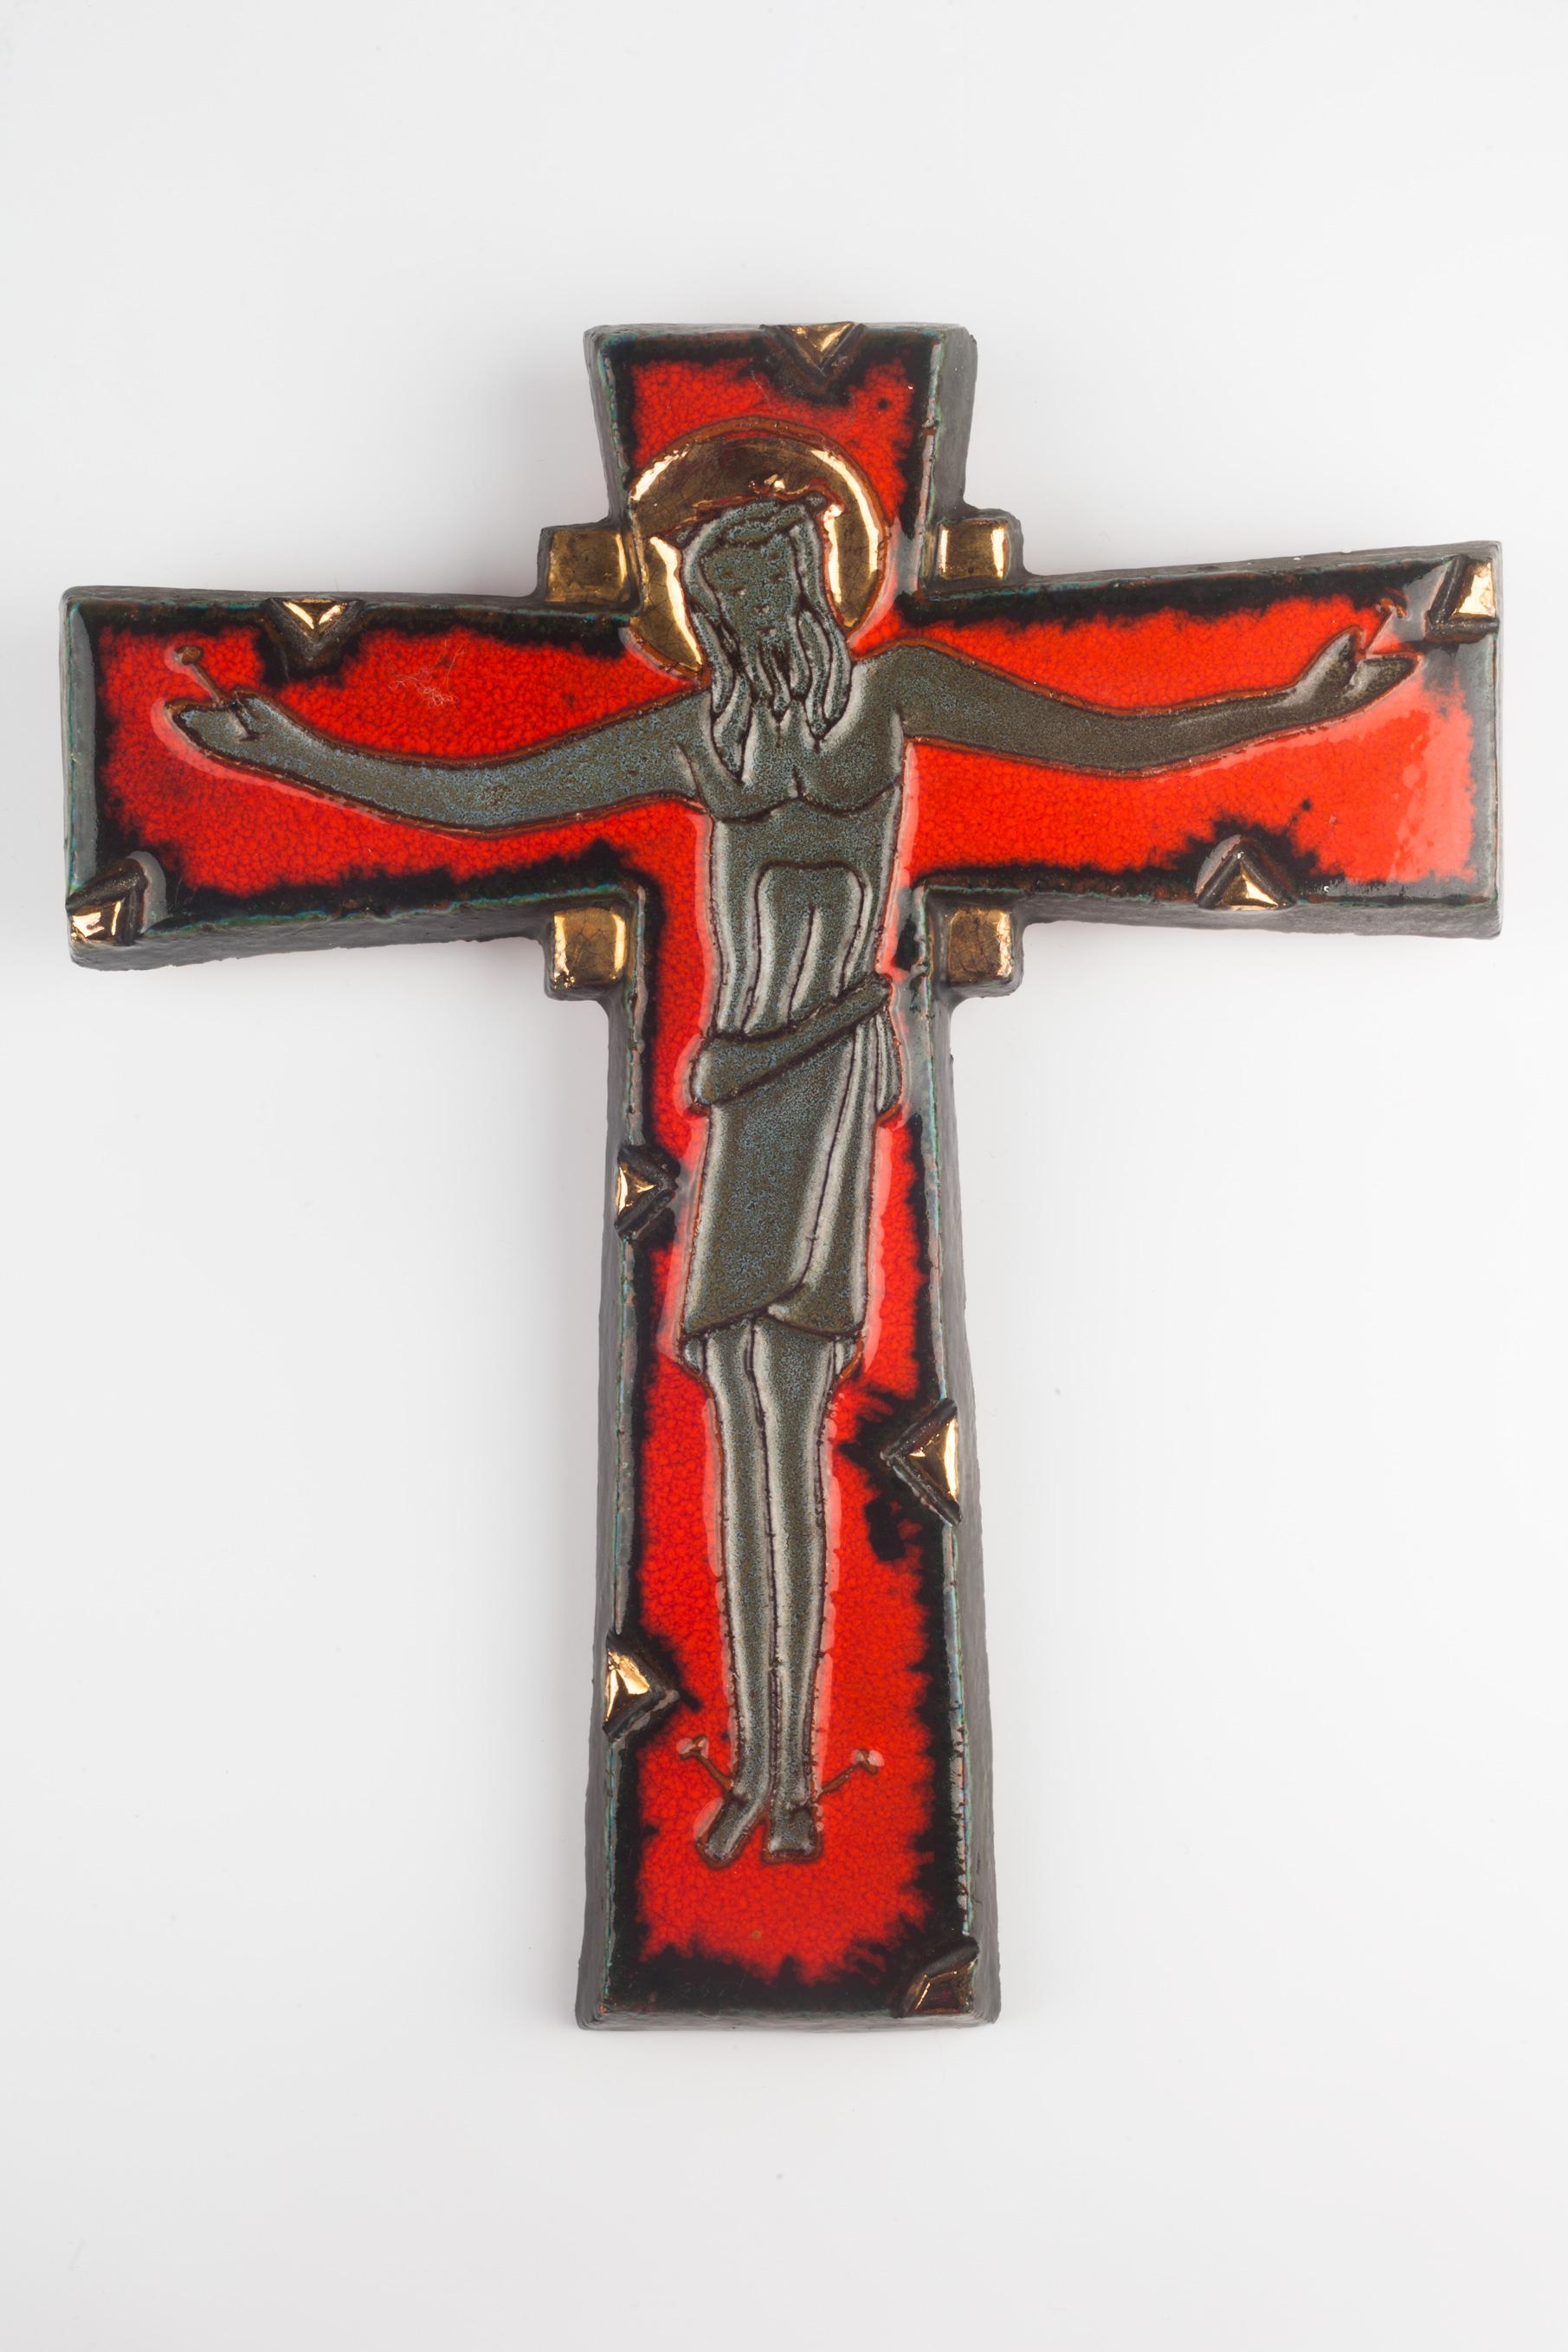 Massive ceramic crucifix in red, black and grey with gilt accents, made in the 1970s. Embossed Christ figure with soft features. A one-of-a-kind, handcrafted piece that is part of a large collection of crosses made by artisan potters from the 1950s